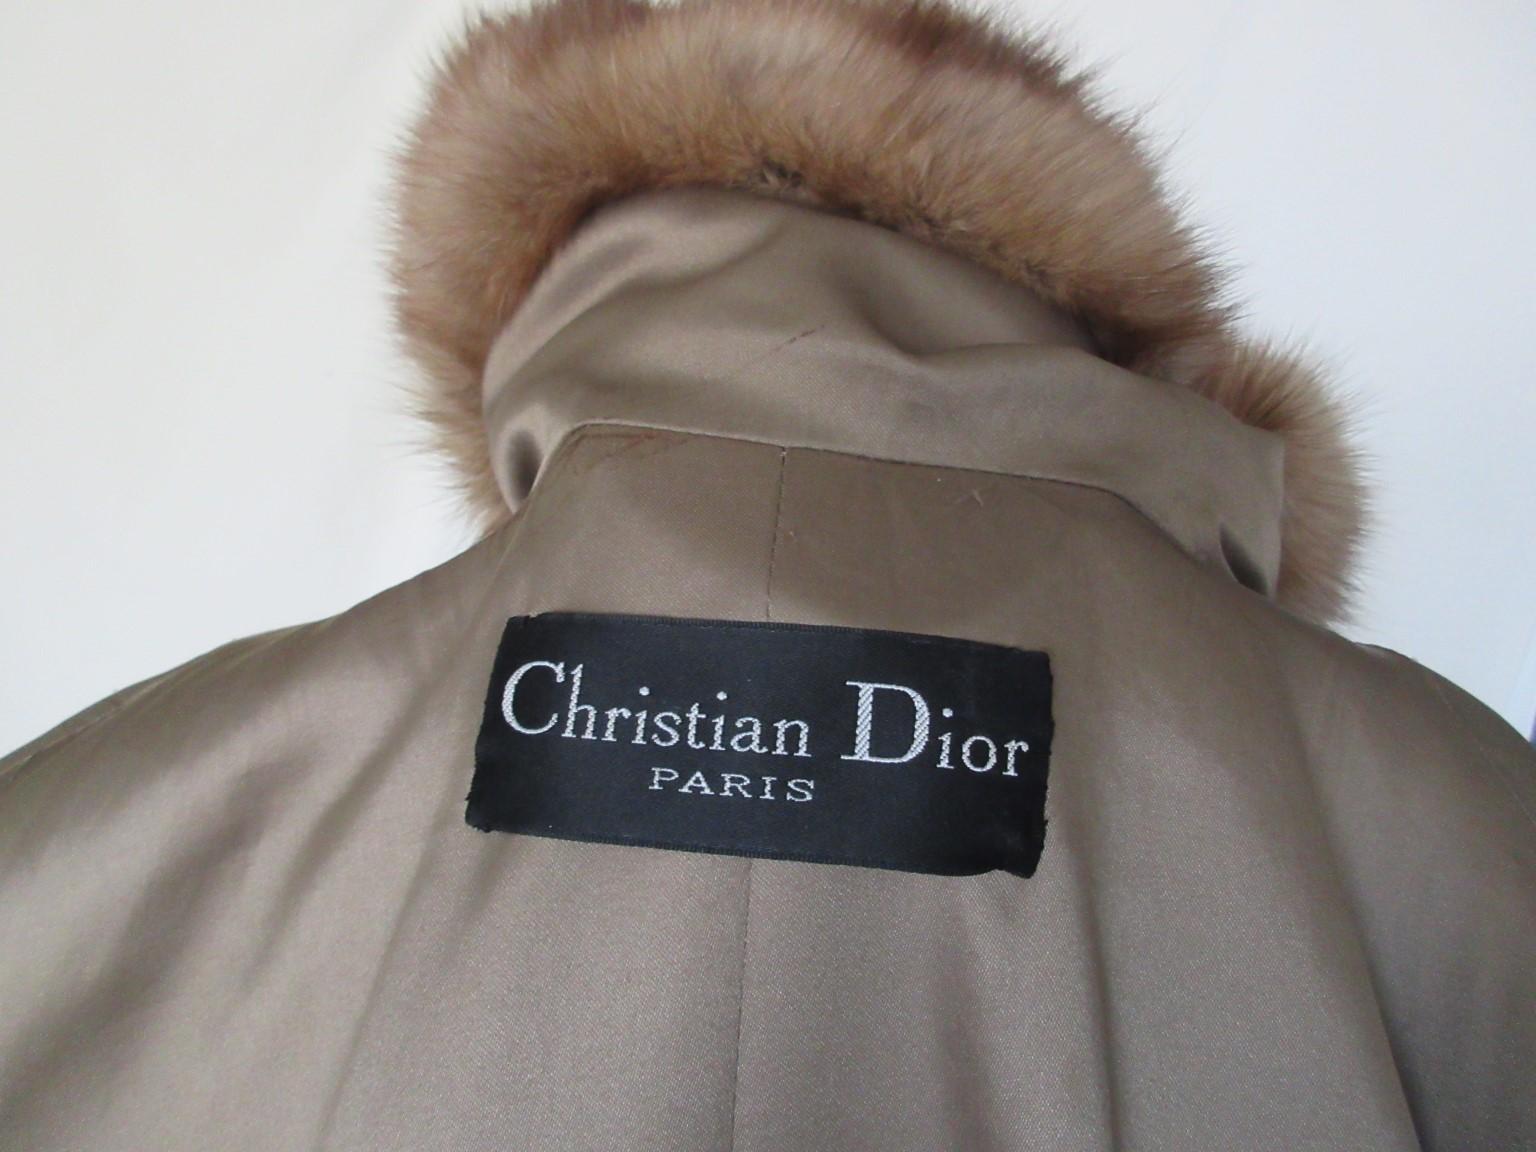 Christian Dior Golden Sable Fur Coat  In Good Condition For Sale In Amsterdam, NL